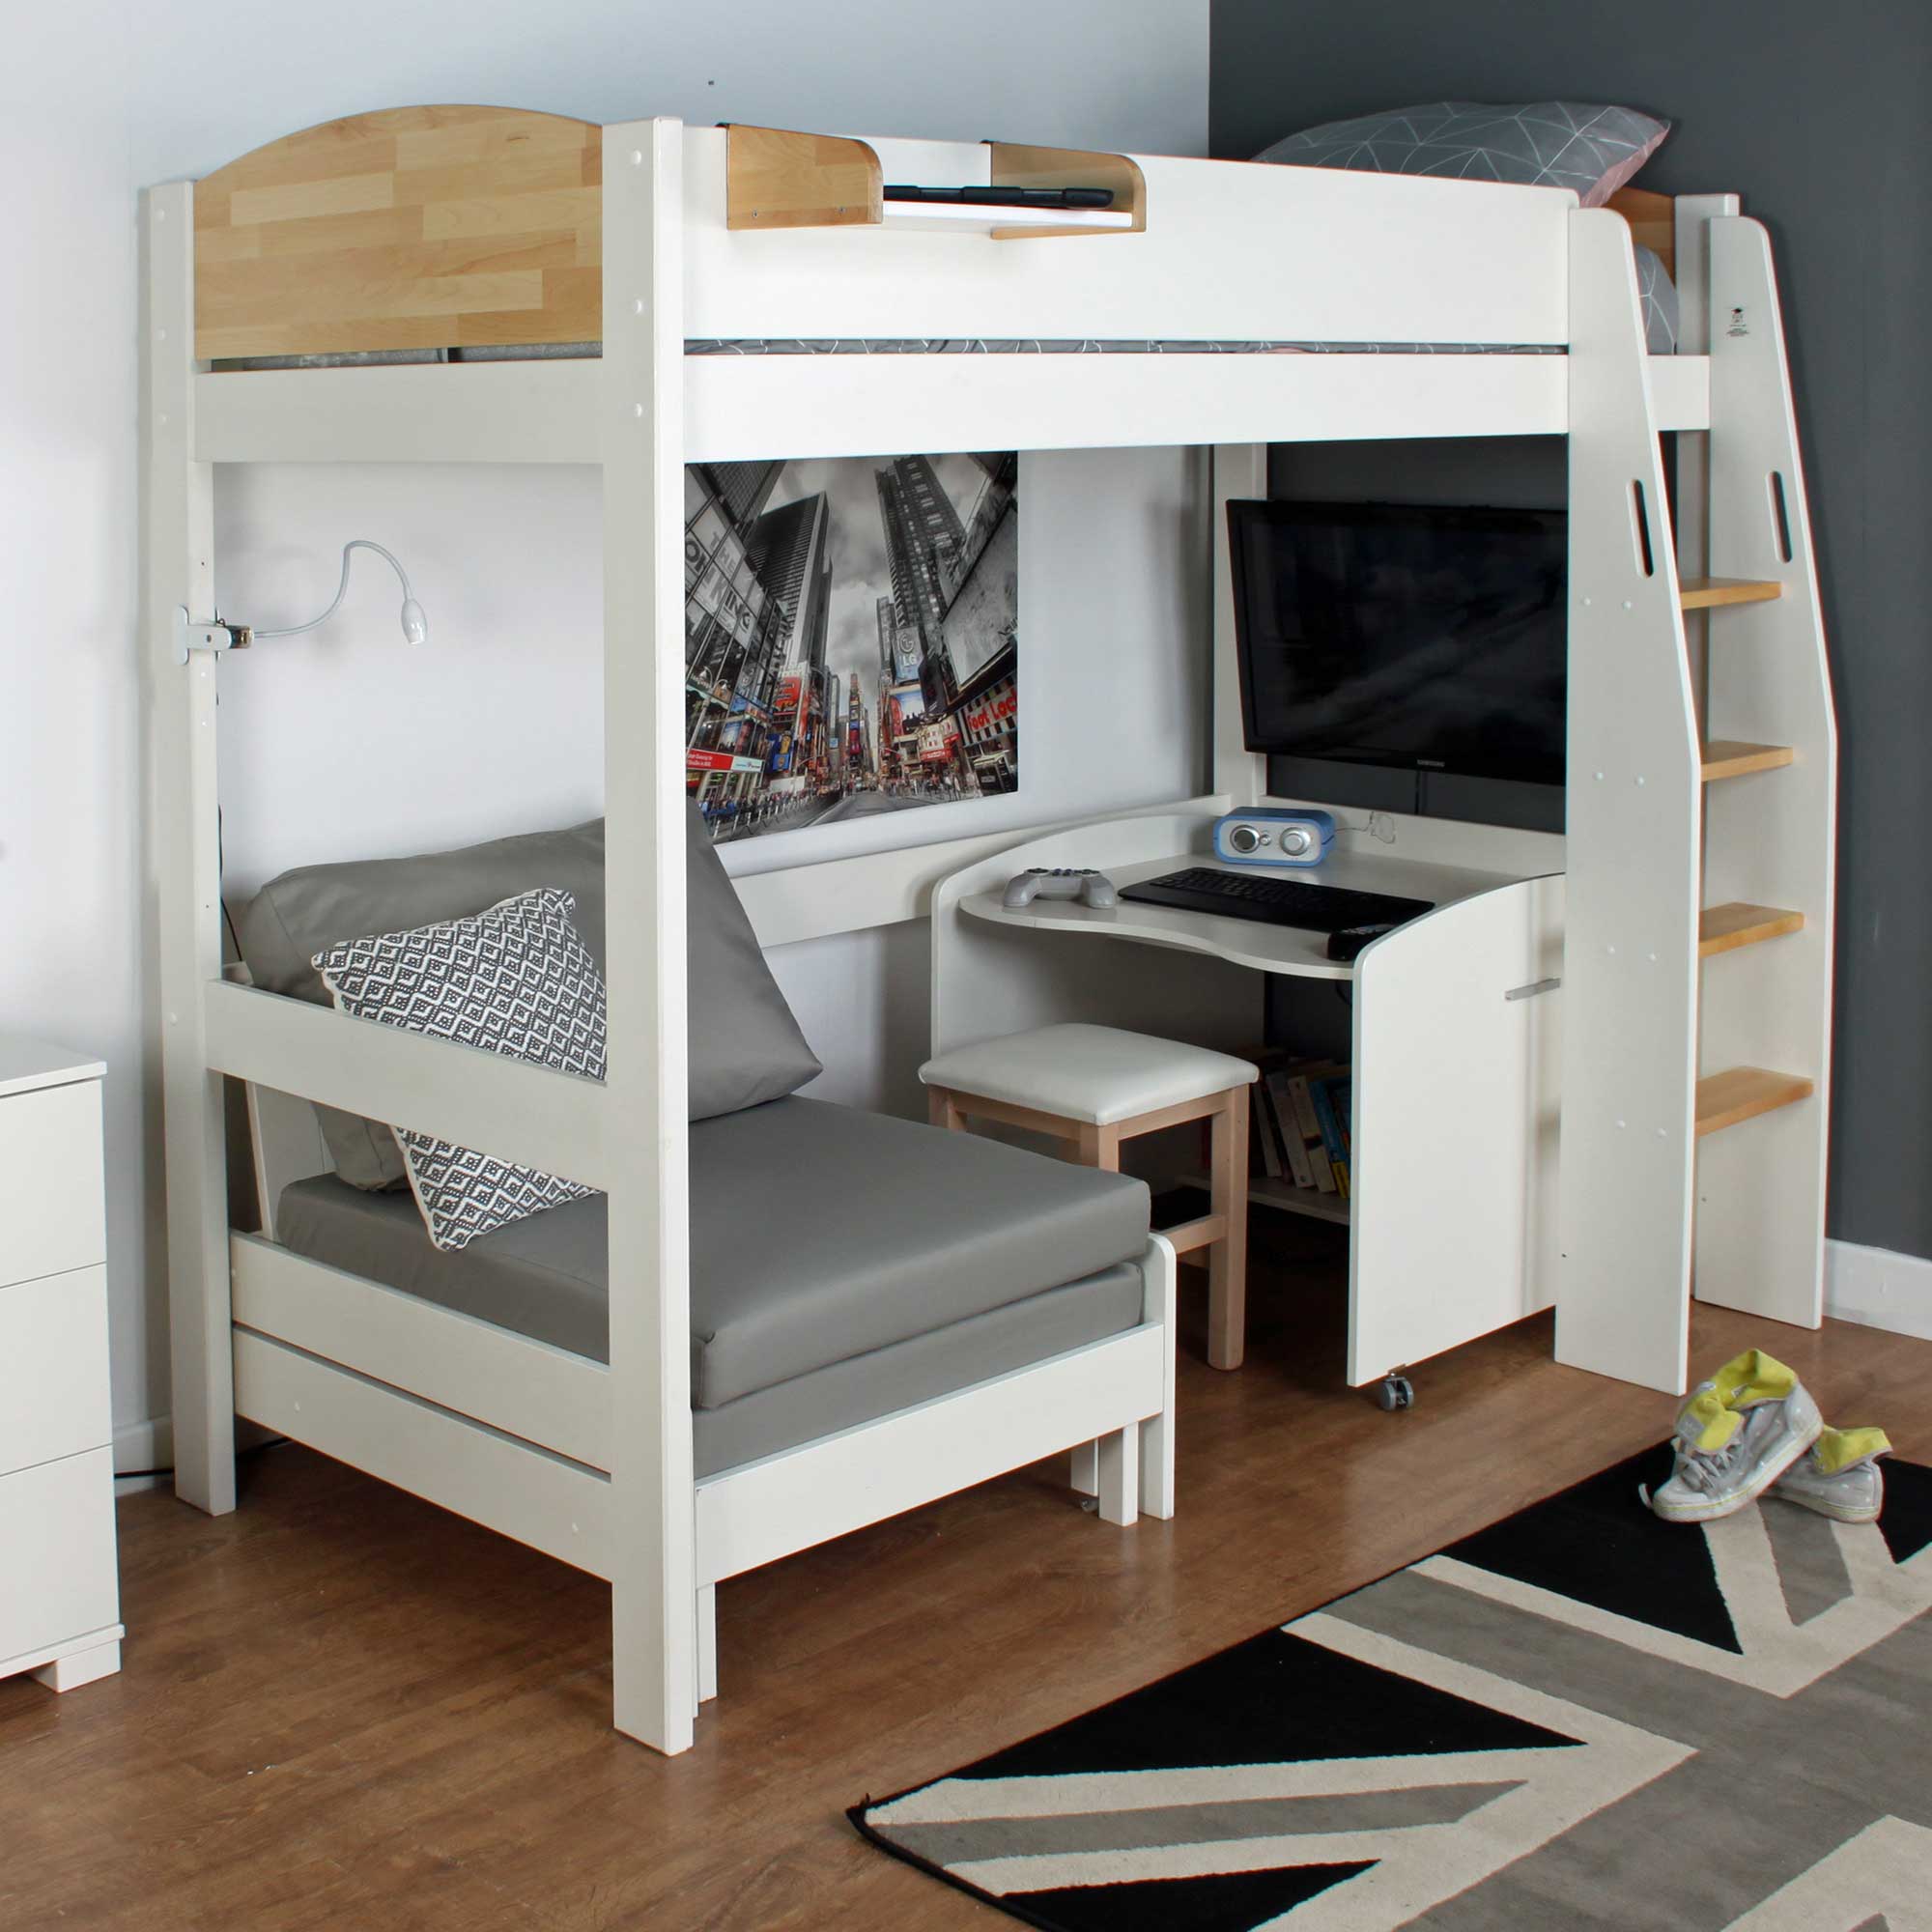 Childrens Bunk Bed With Desk Free, Childs Bunk Bed With Desk